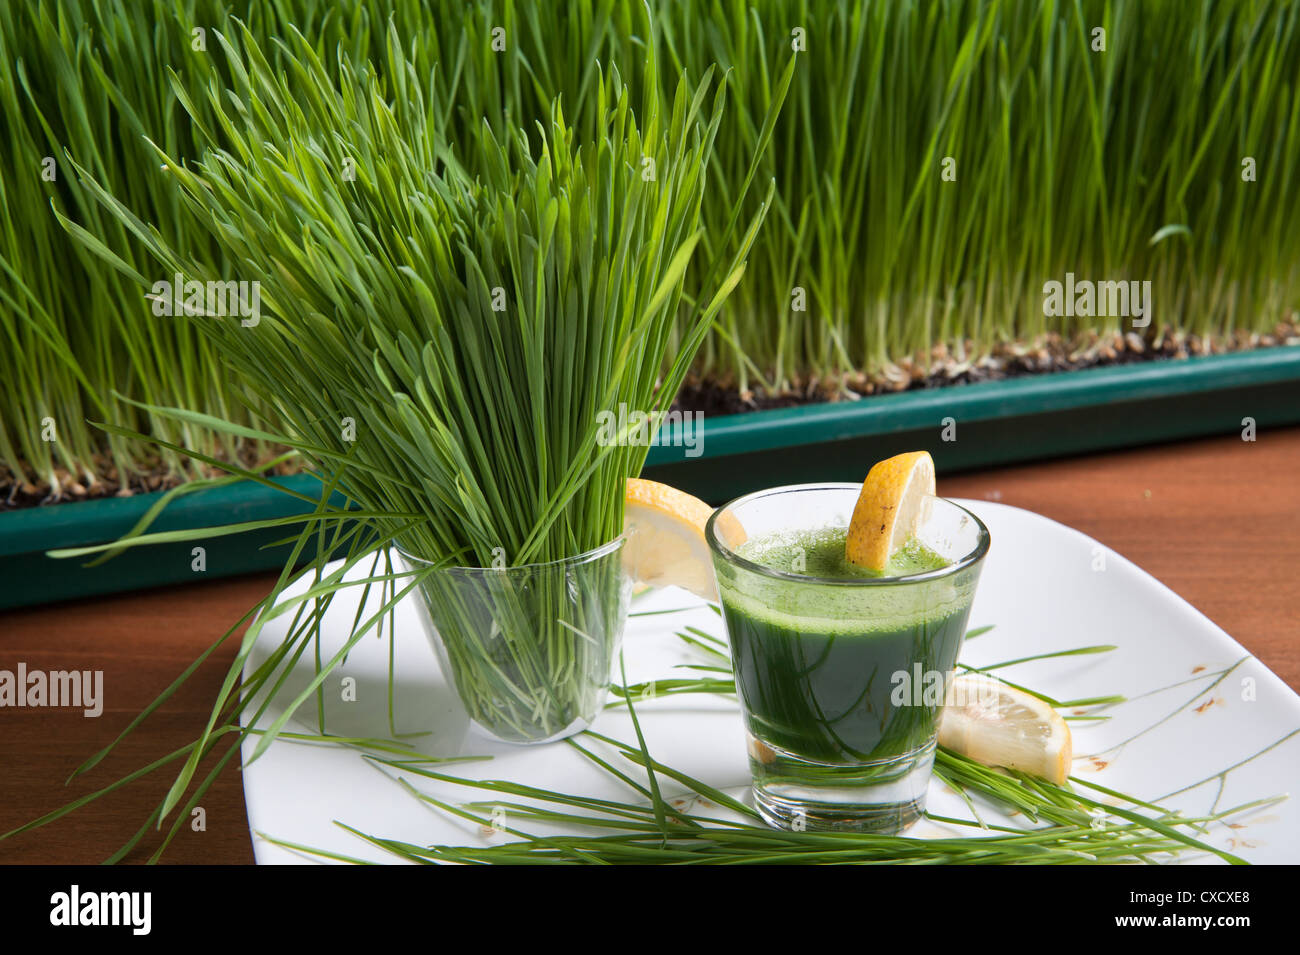 Wheat Grass sprouts and Wheatgrass drink  Stock Photo